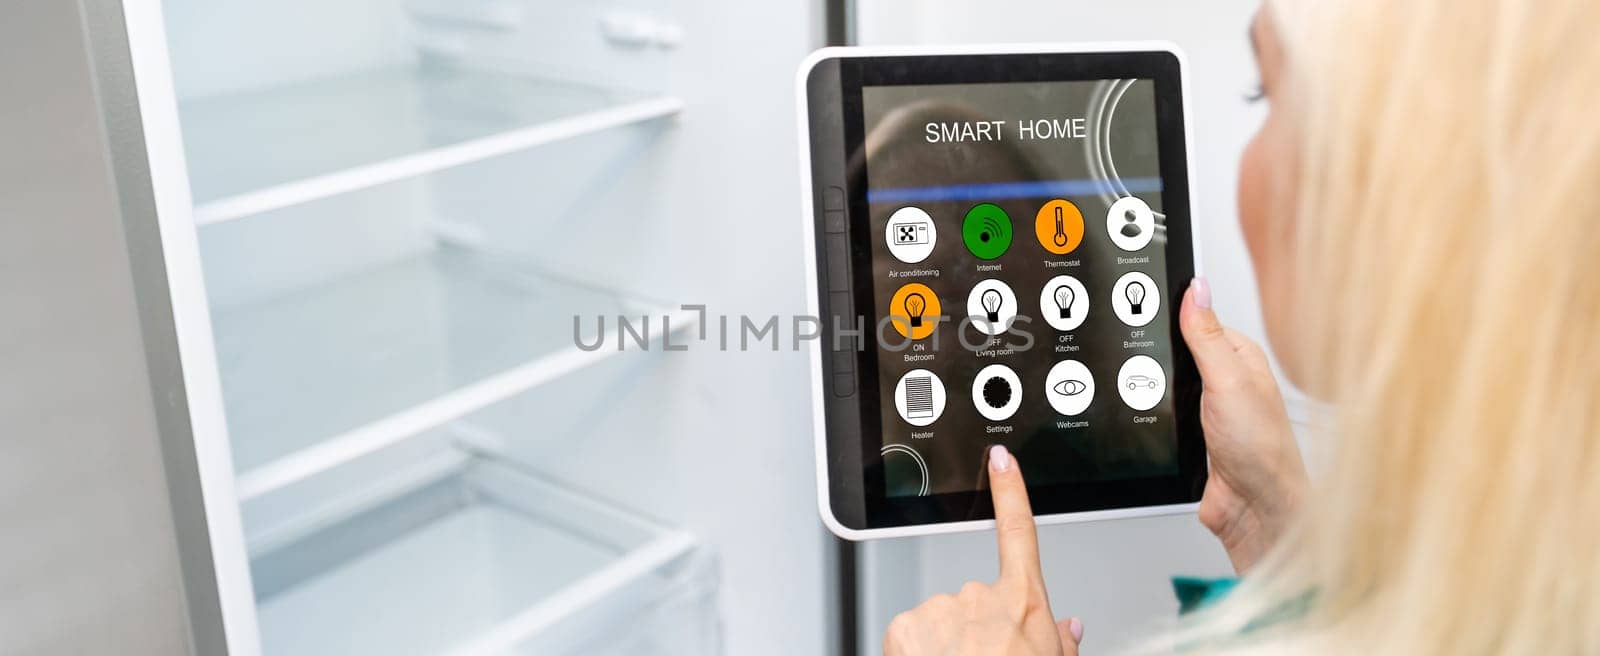 Conception of smart kitchen controlled by tablet application.